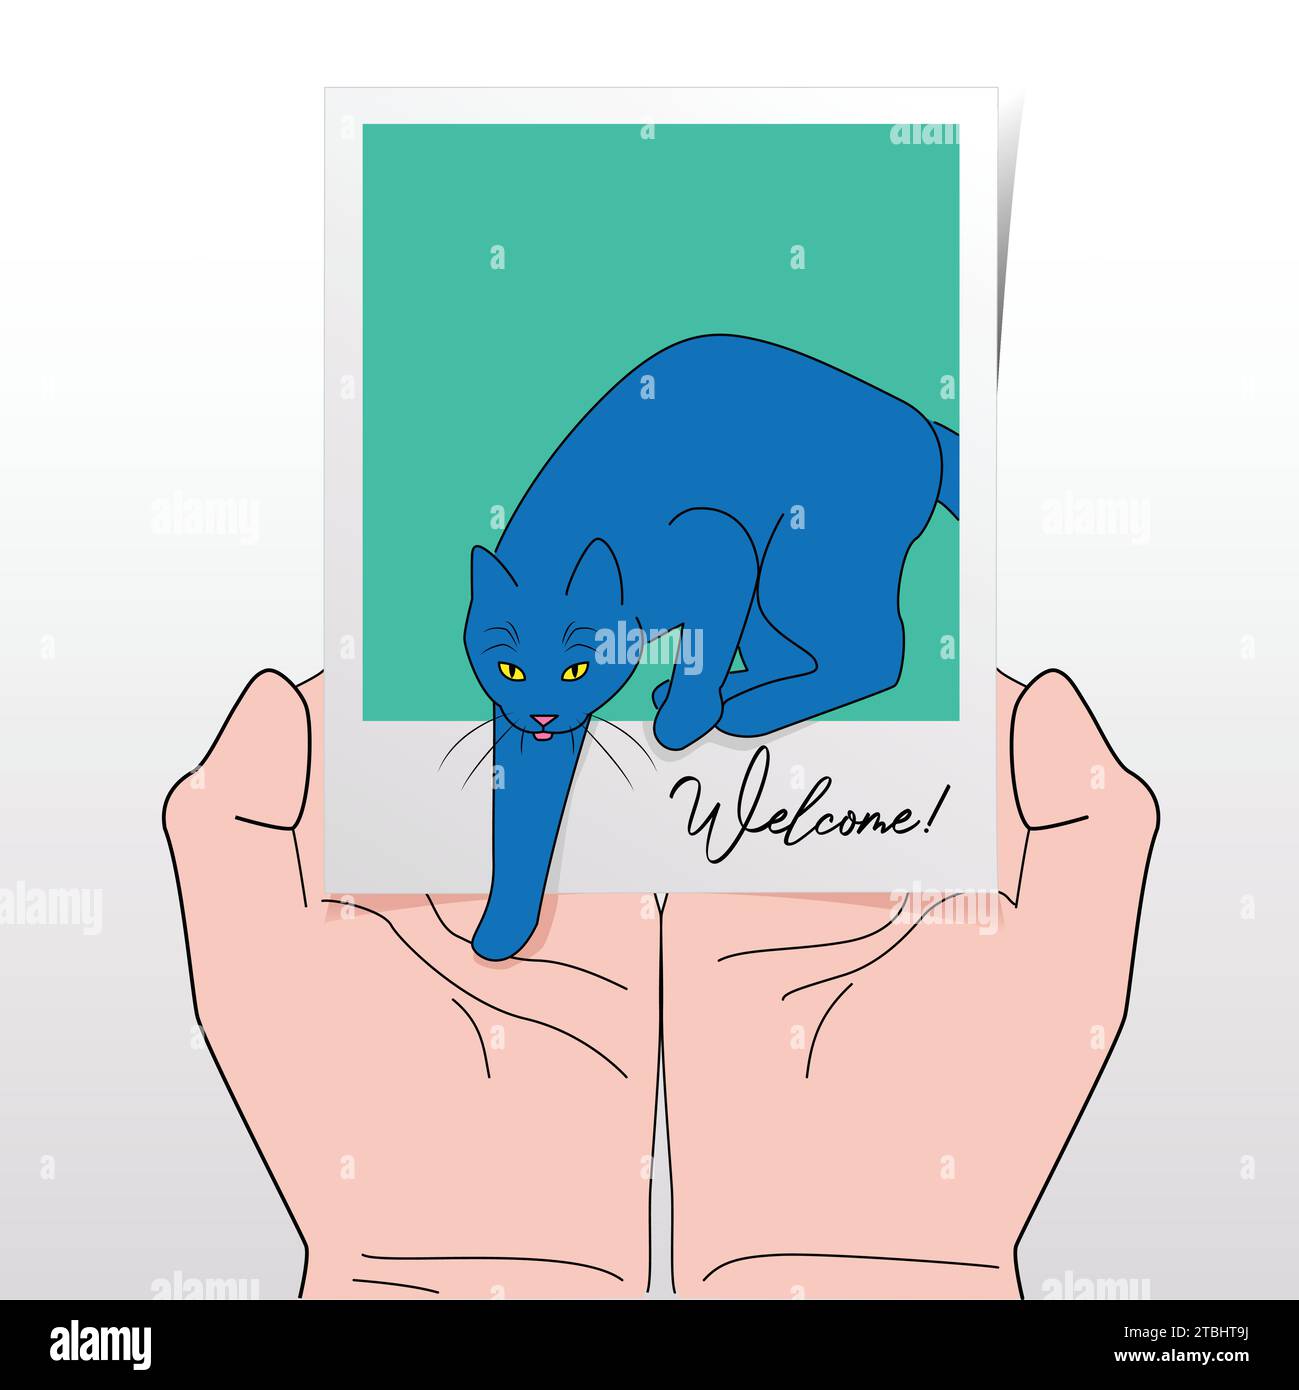 Cat Stepping On Outstretched Hands From Instant Print Photograph With Written Word “Welcome!” Referring To Rescuing, Fostering, Adopting A New Pet Cat Stock Vector